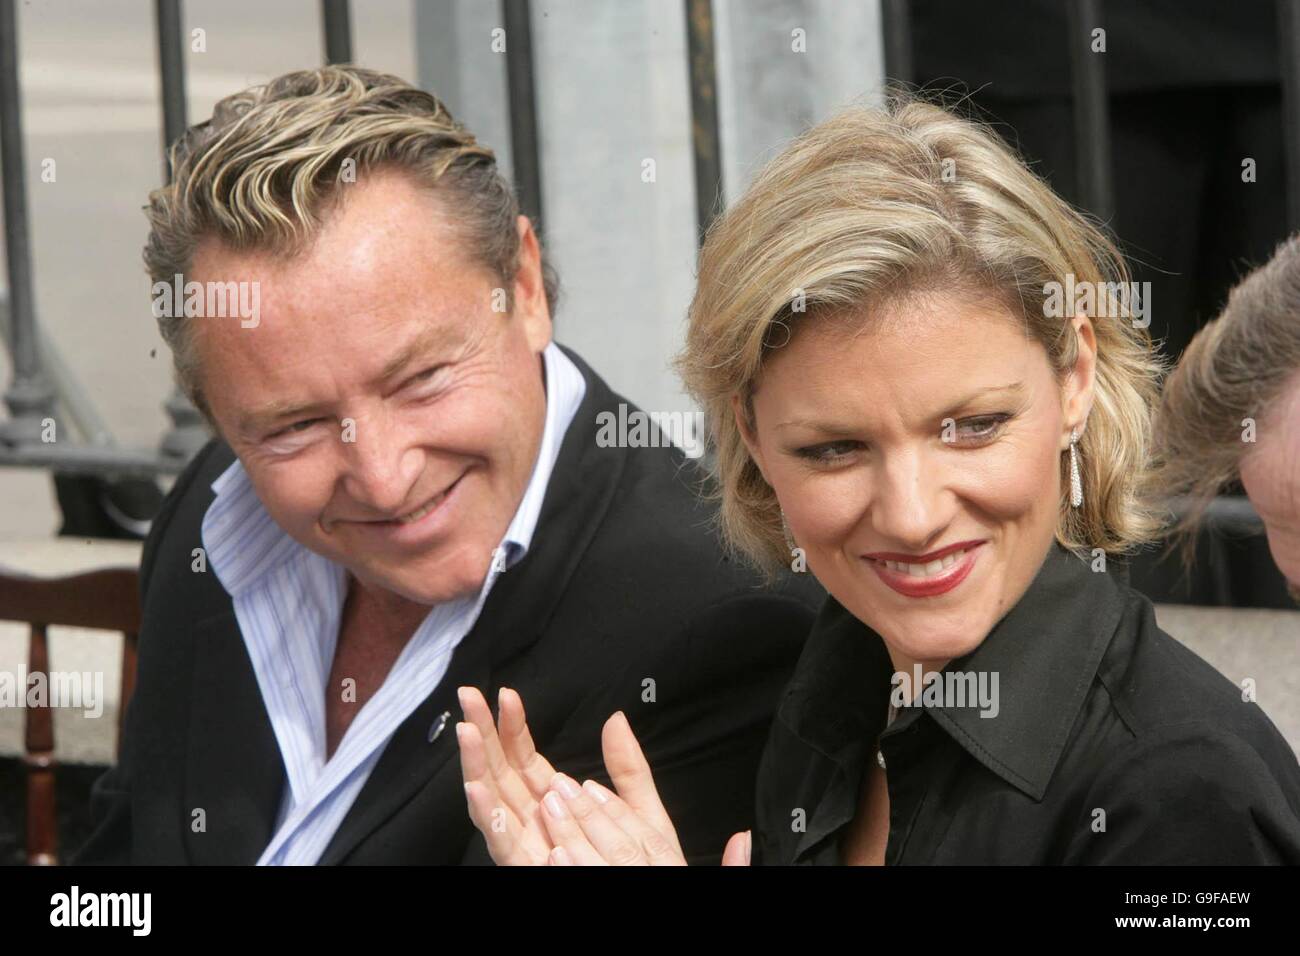 Irish dancer Michael Flatley with his girlfriend Niamh O'Brien, before meeting New York's Mayor Michael Bloomberg at the unveiling of a monument to the Fighting 69th Regiment in Ballymote, County Sligo, today. Stock Photo